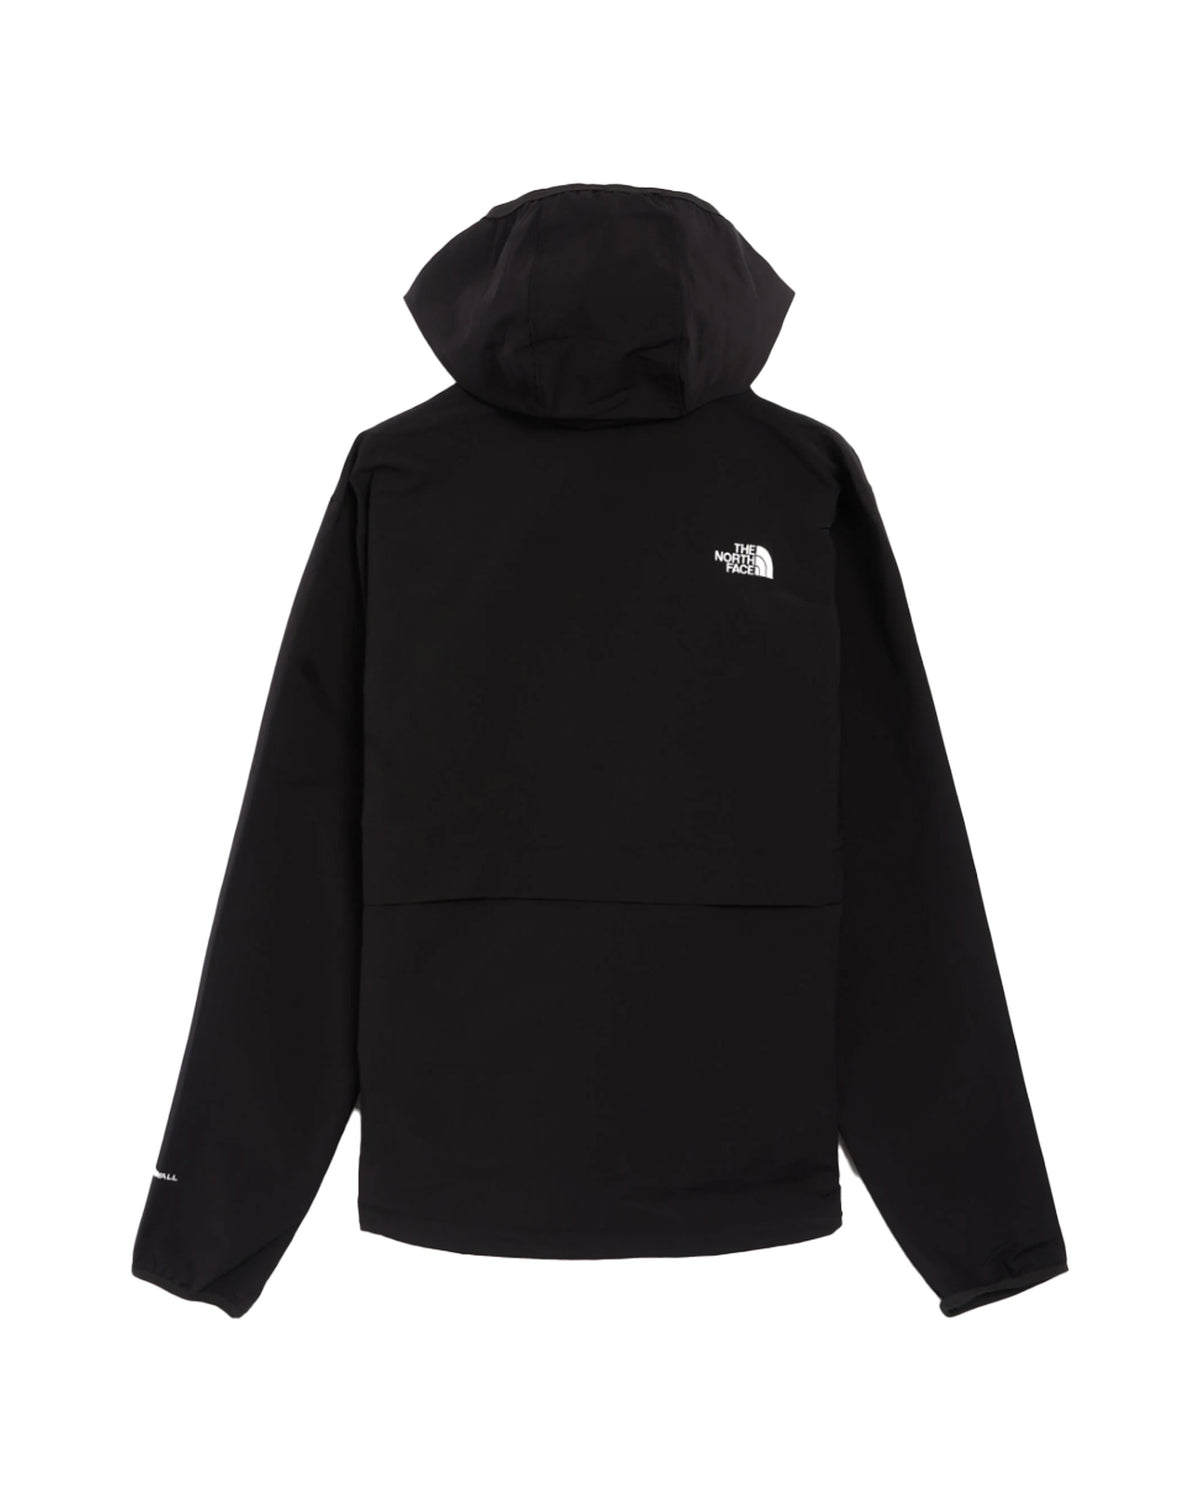 The North Face Easy Wind FZ Jacket Black